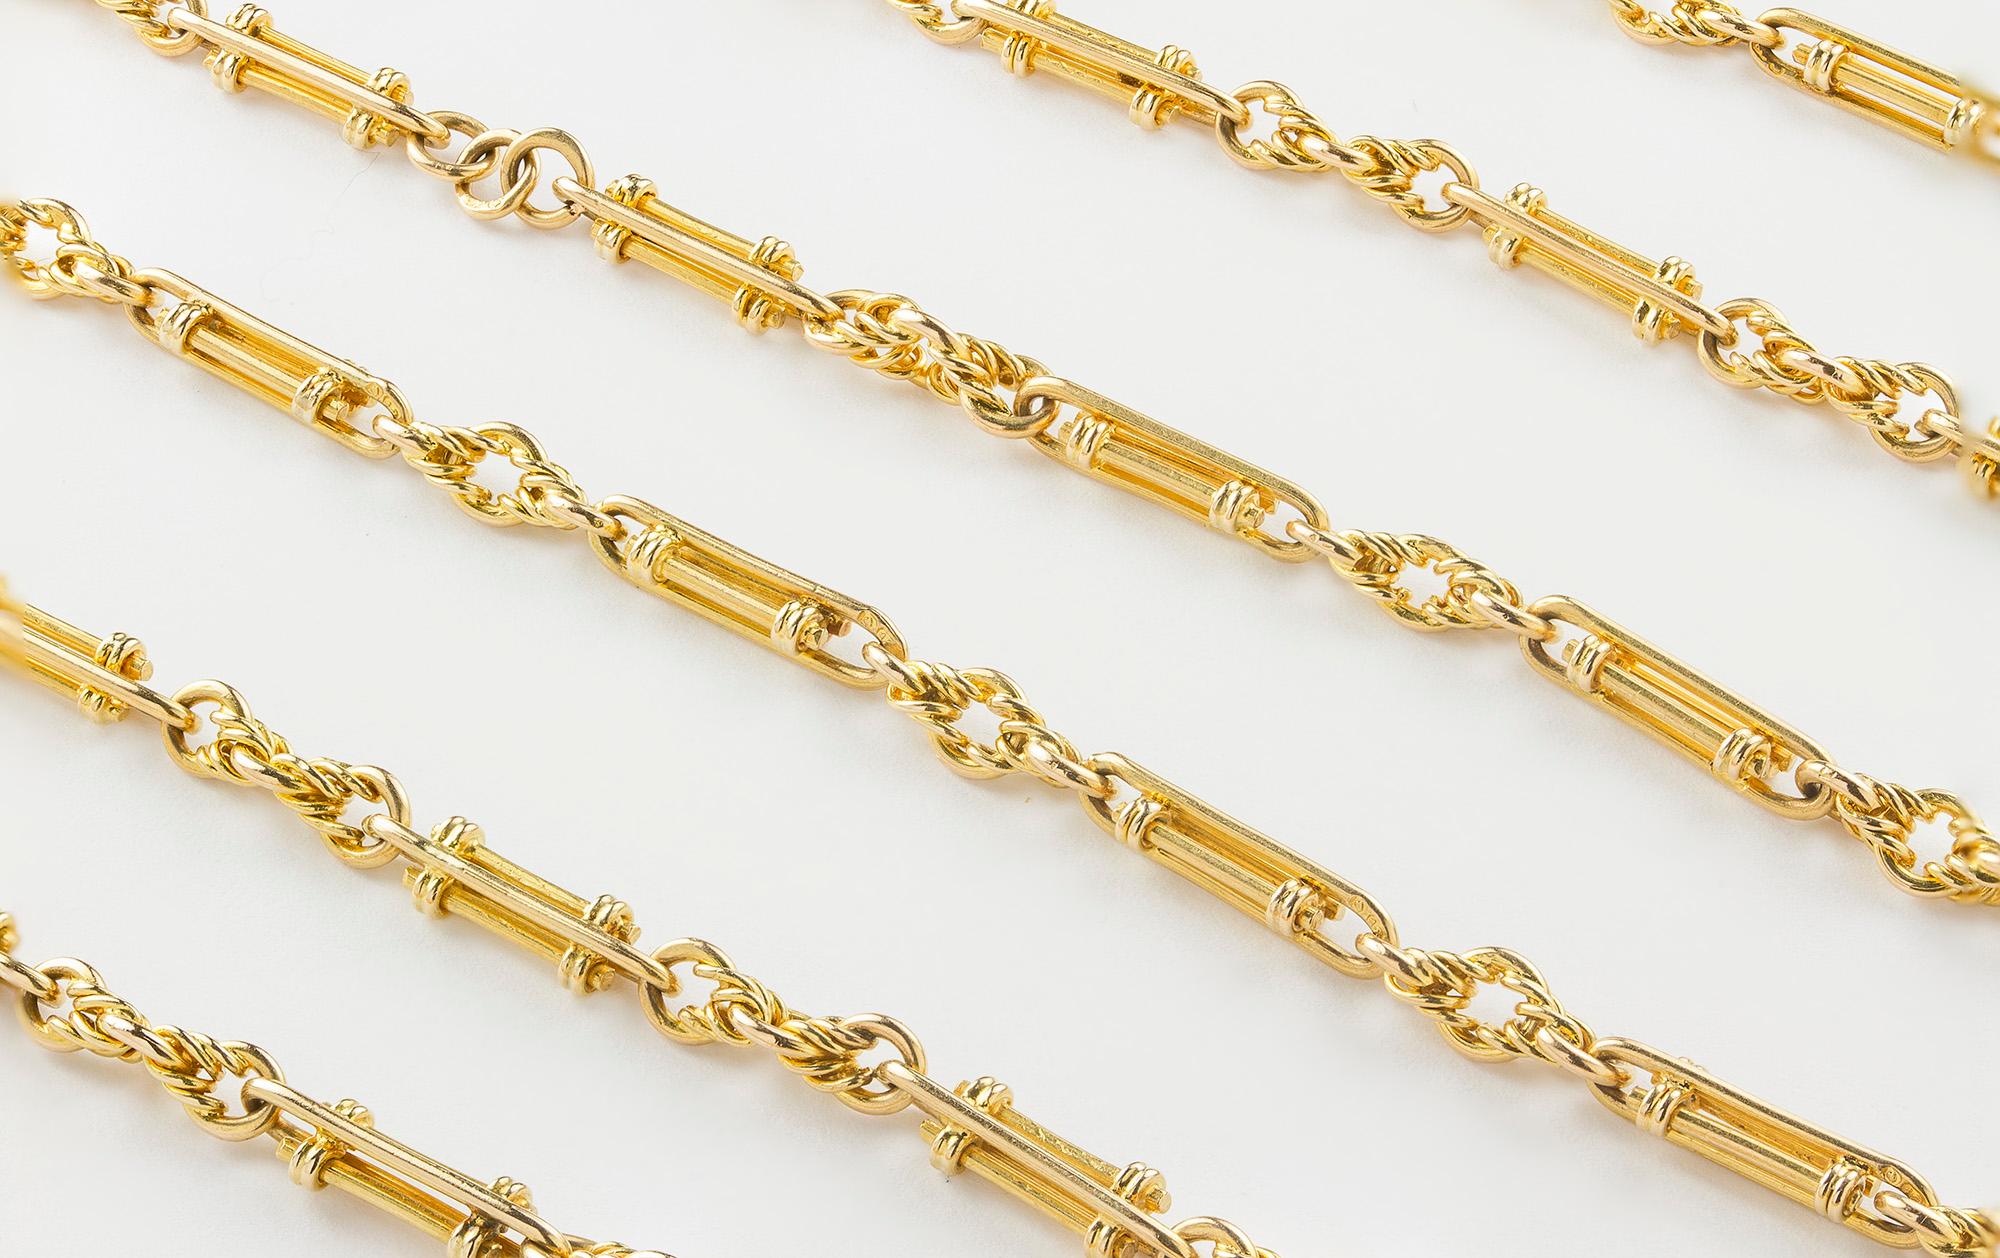 A Victorian 18ct long fancy link guard chain, each openwork bar design link alternating with a decorative knot link, no clasp, circa 1860, measuring approximately 142cm, gross weight 61.6 grams,

Should you choose to make this purchase we will